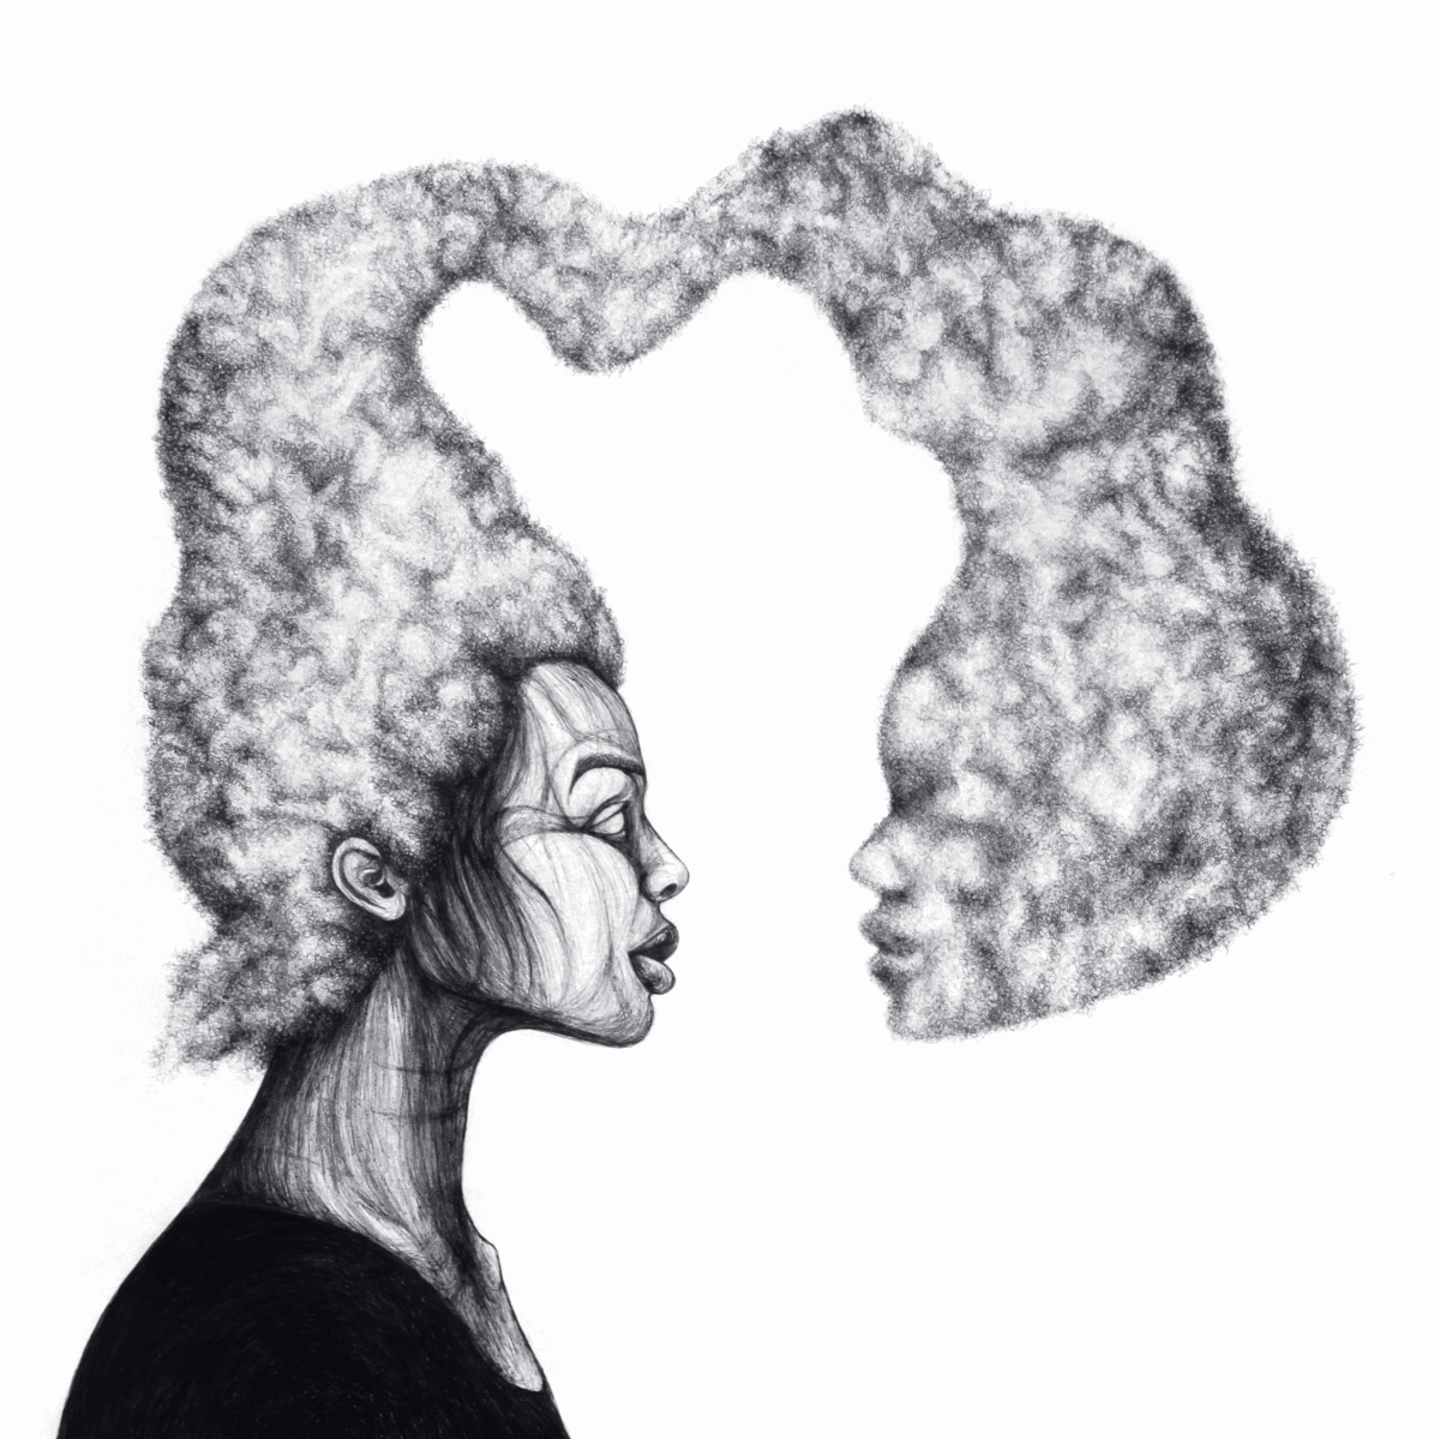 A line drawing of a figure in profile, with hair that is creating a cloud shape and appears to be looking at the face. The drawing is animated subtly to show the person blinking.